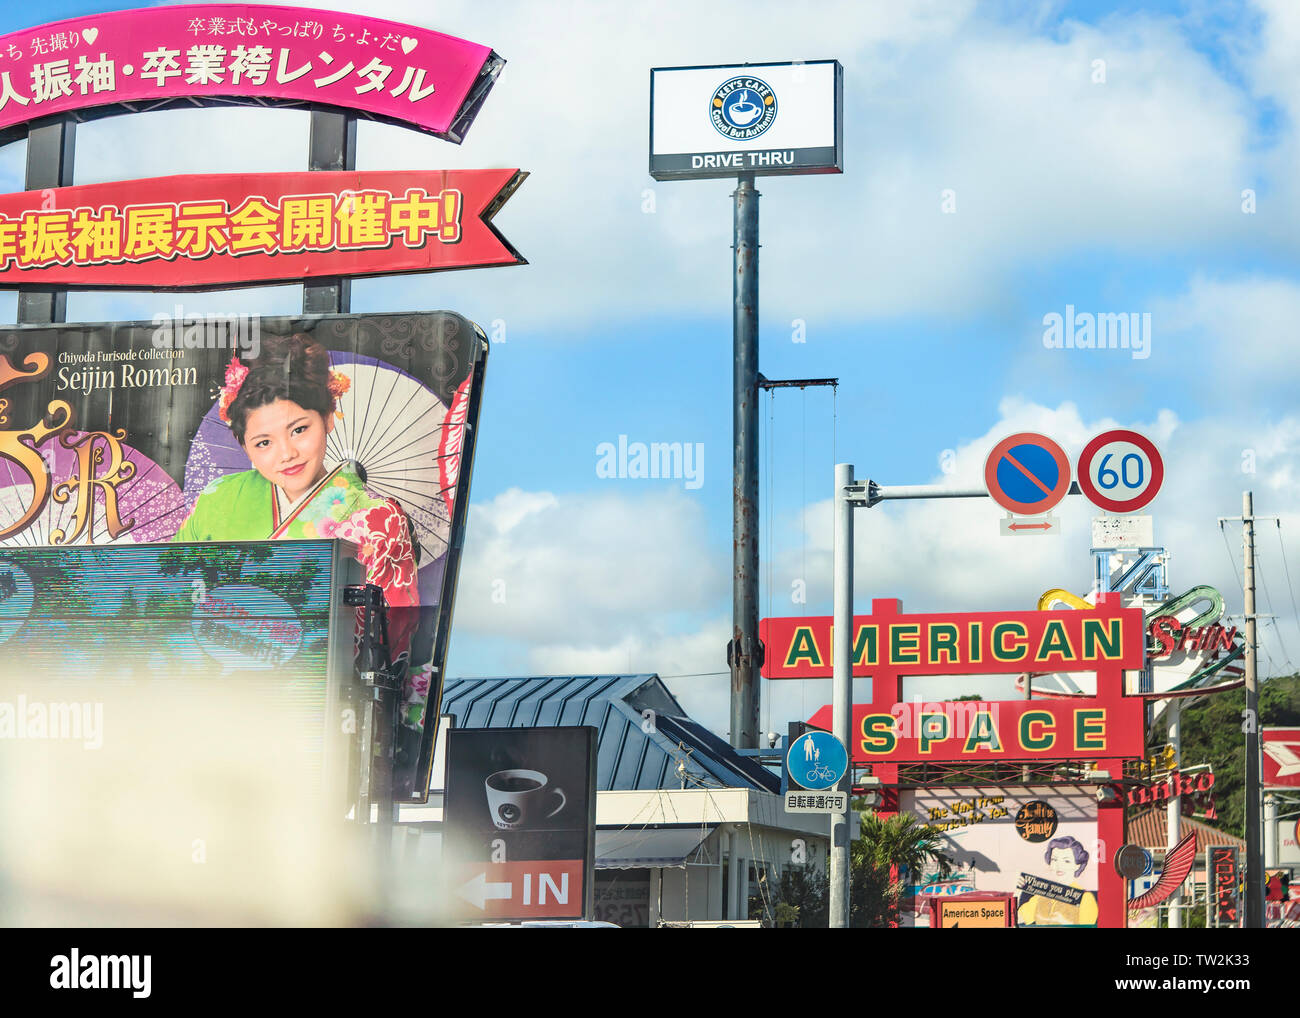 Big sign of stores in the Chatan City in Okinawa. Stock Photo